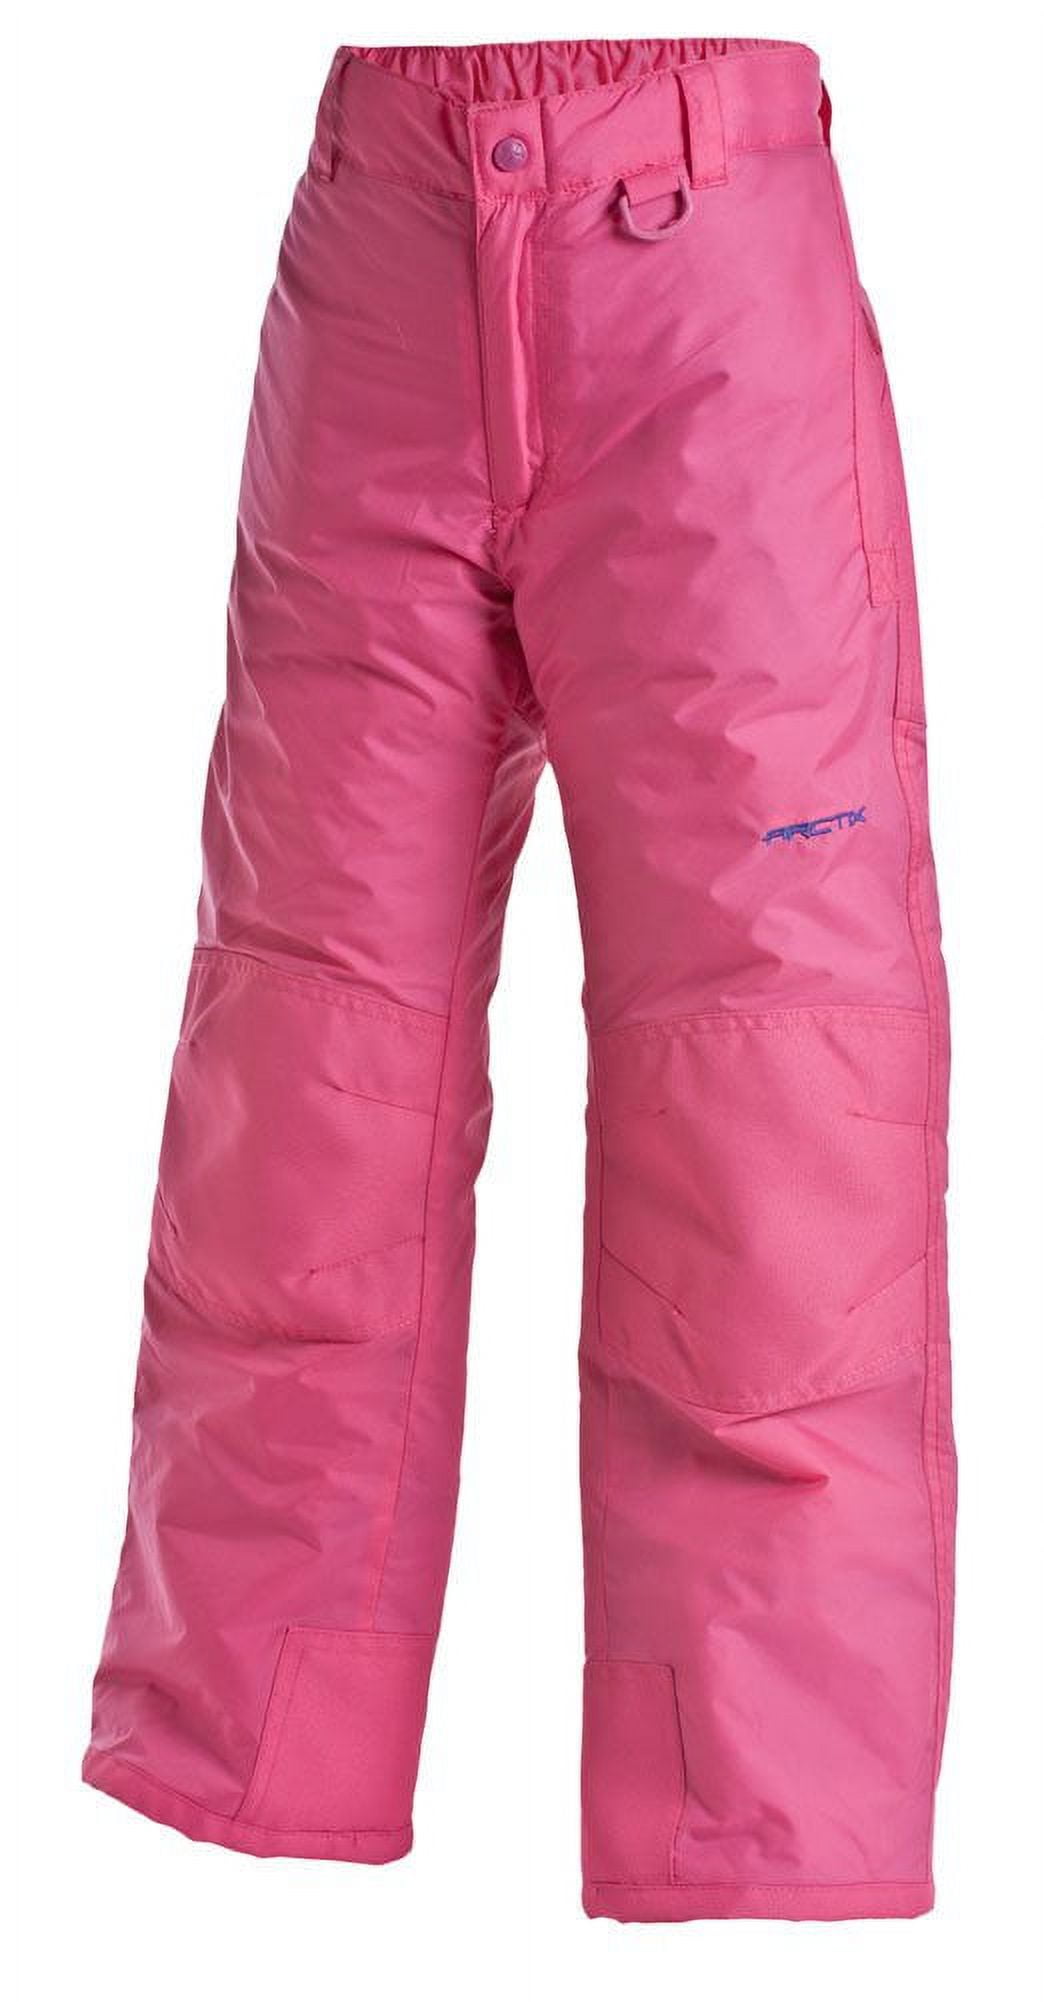 Arctix Youth Snow Pants with Reinforced Knees and Seat - Fuchsia, S 